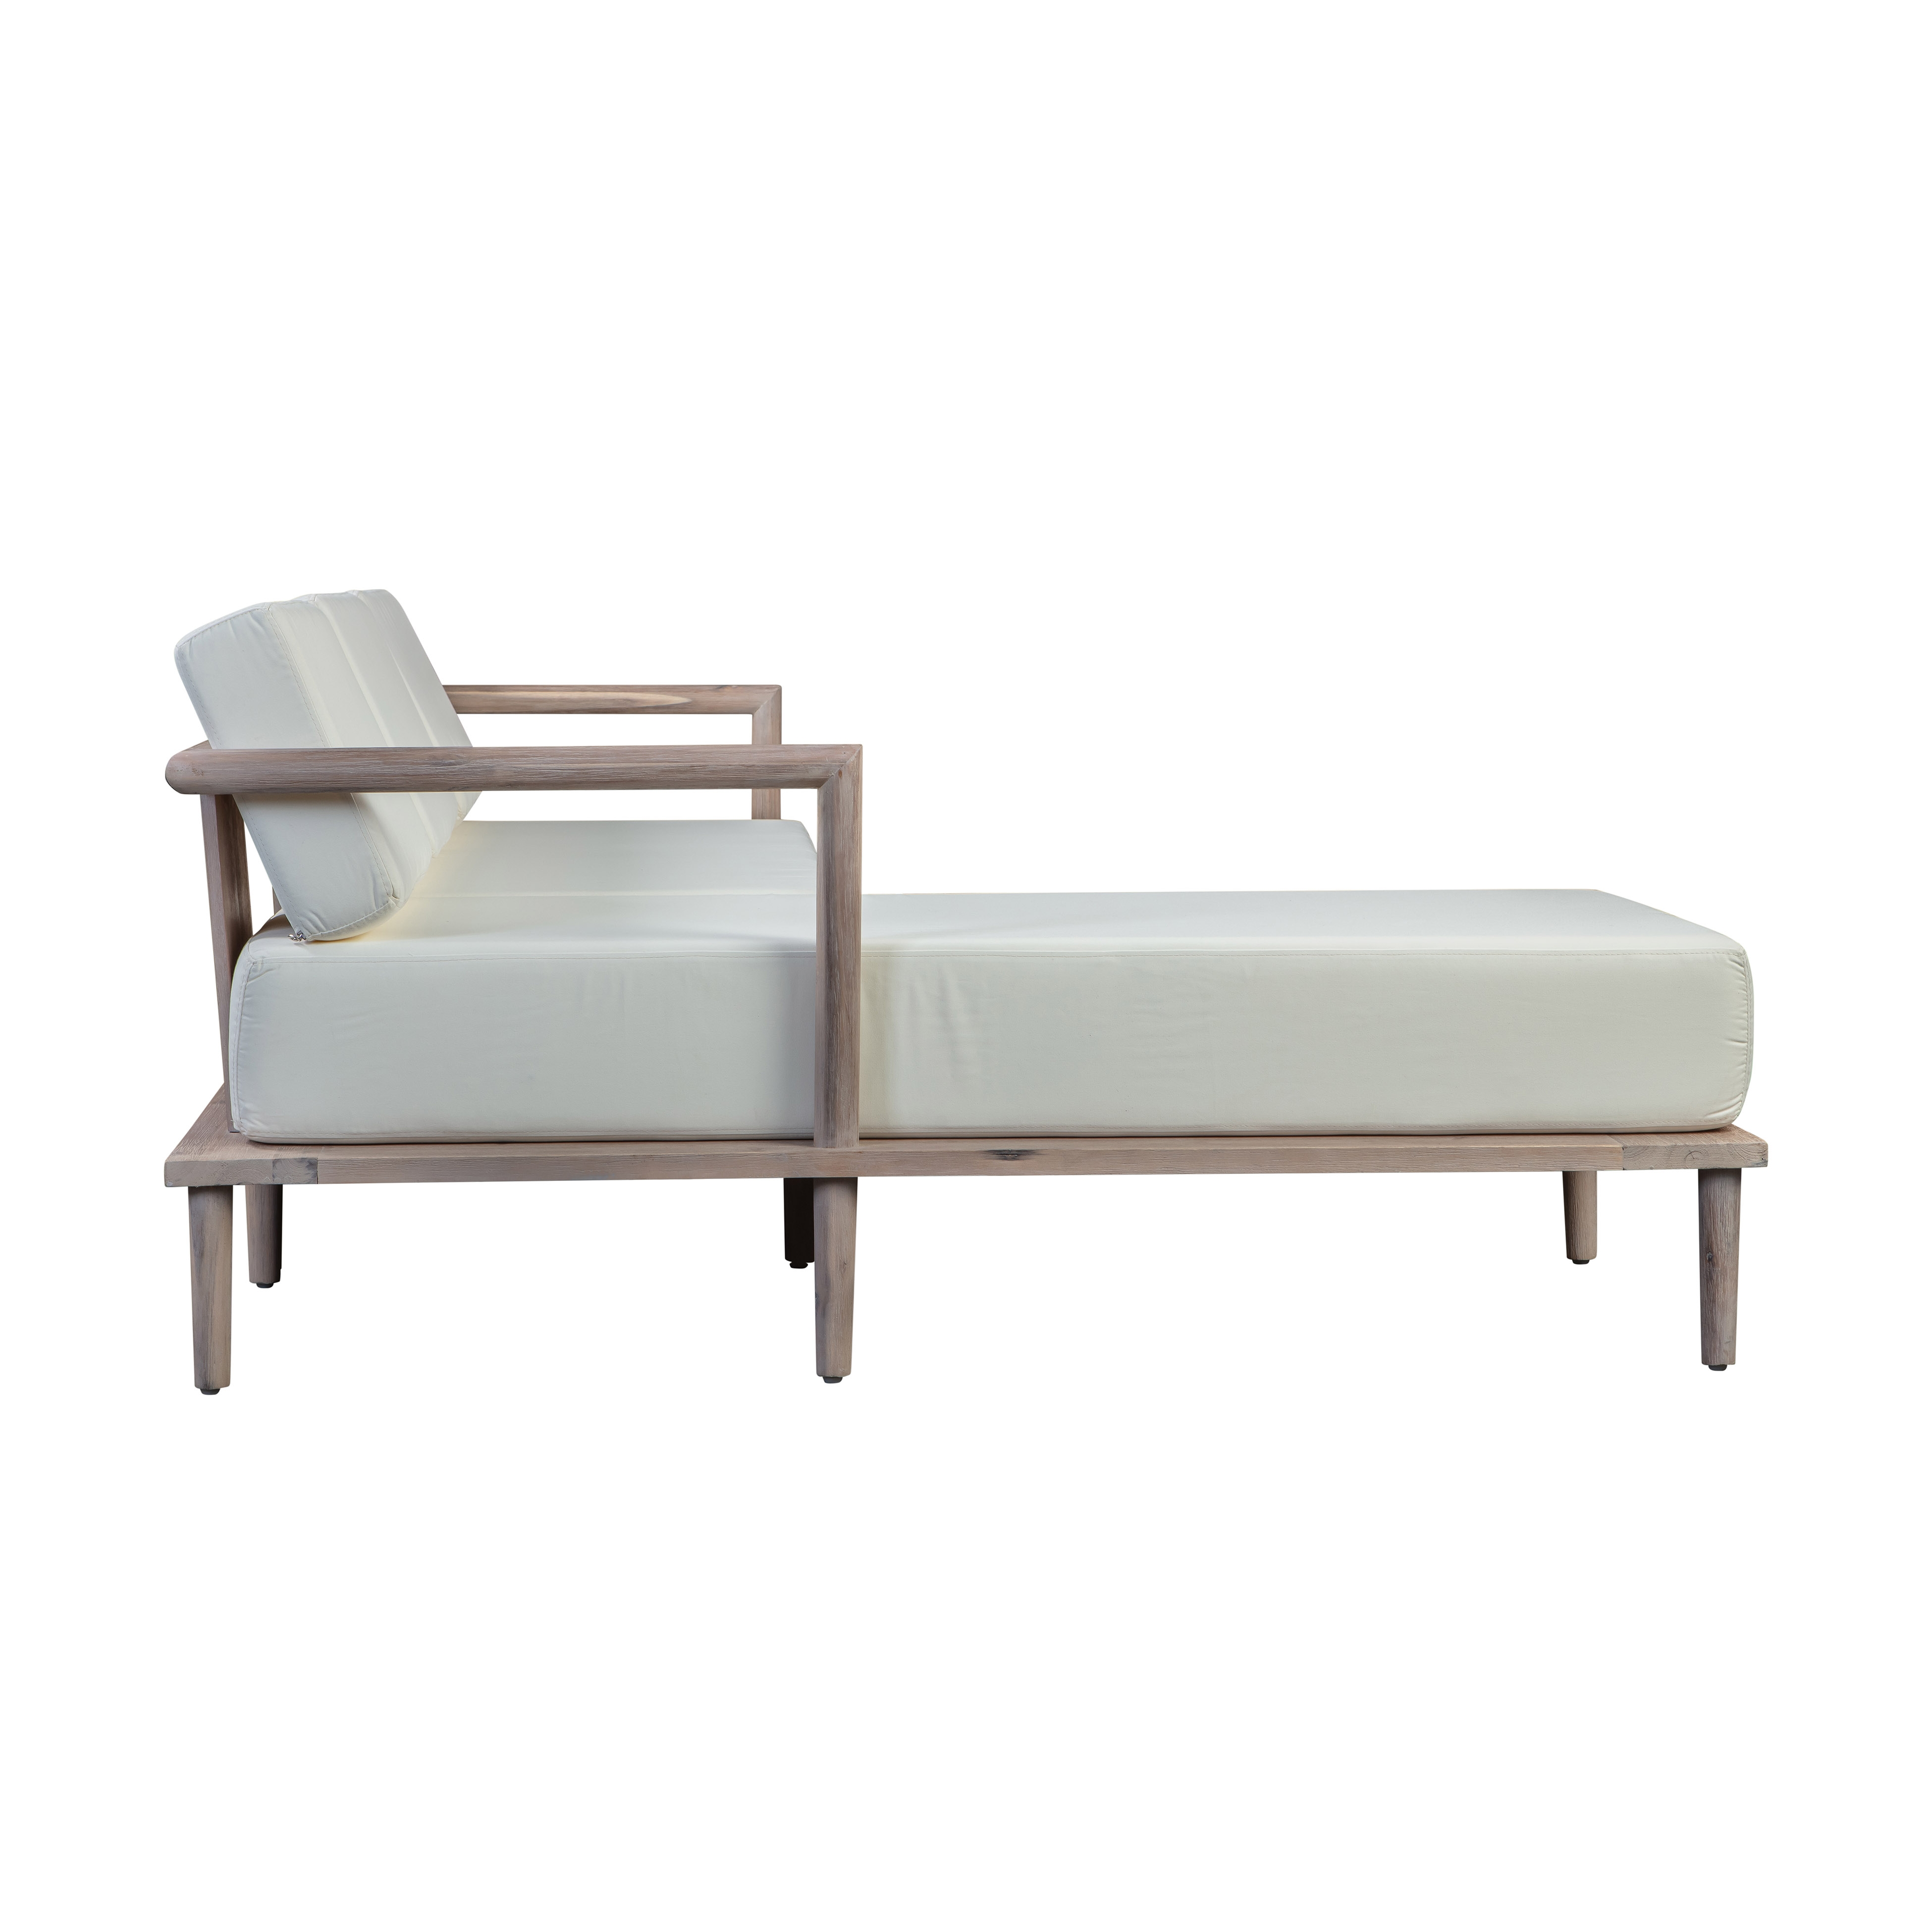 Emerson Cream Outdoor Sectional - LAF - Image 2